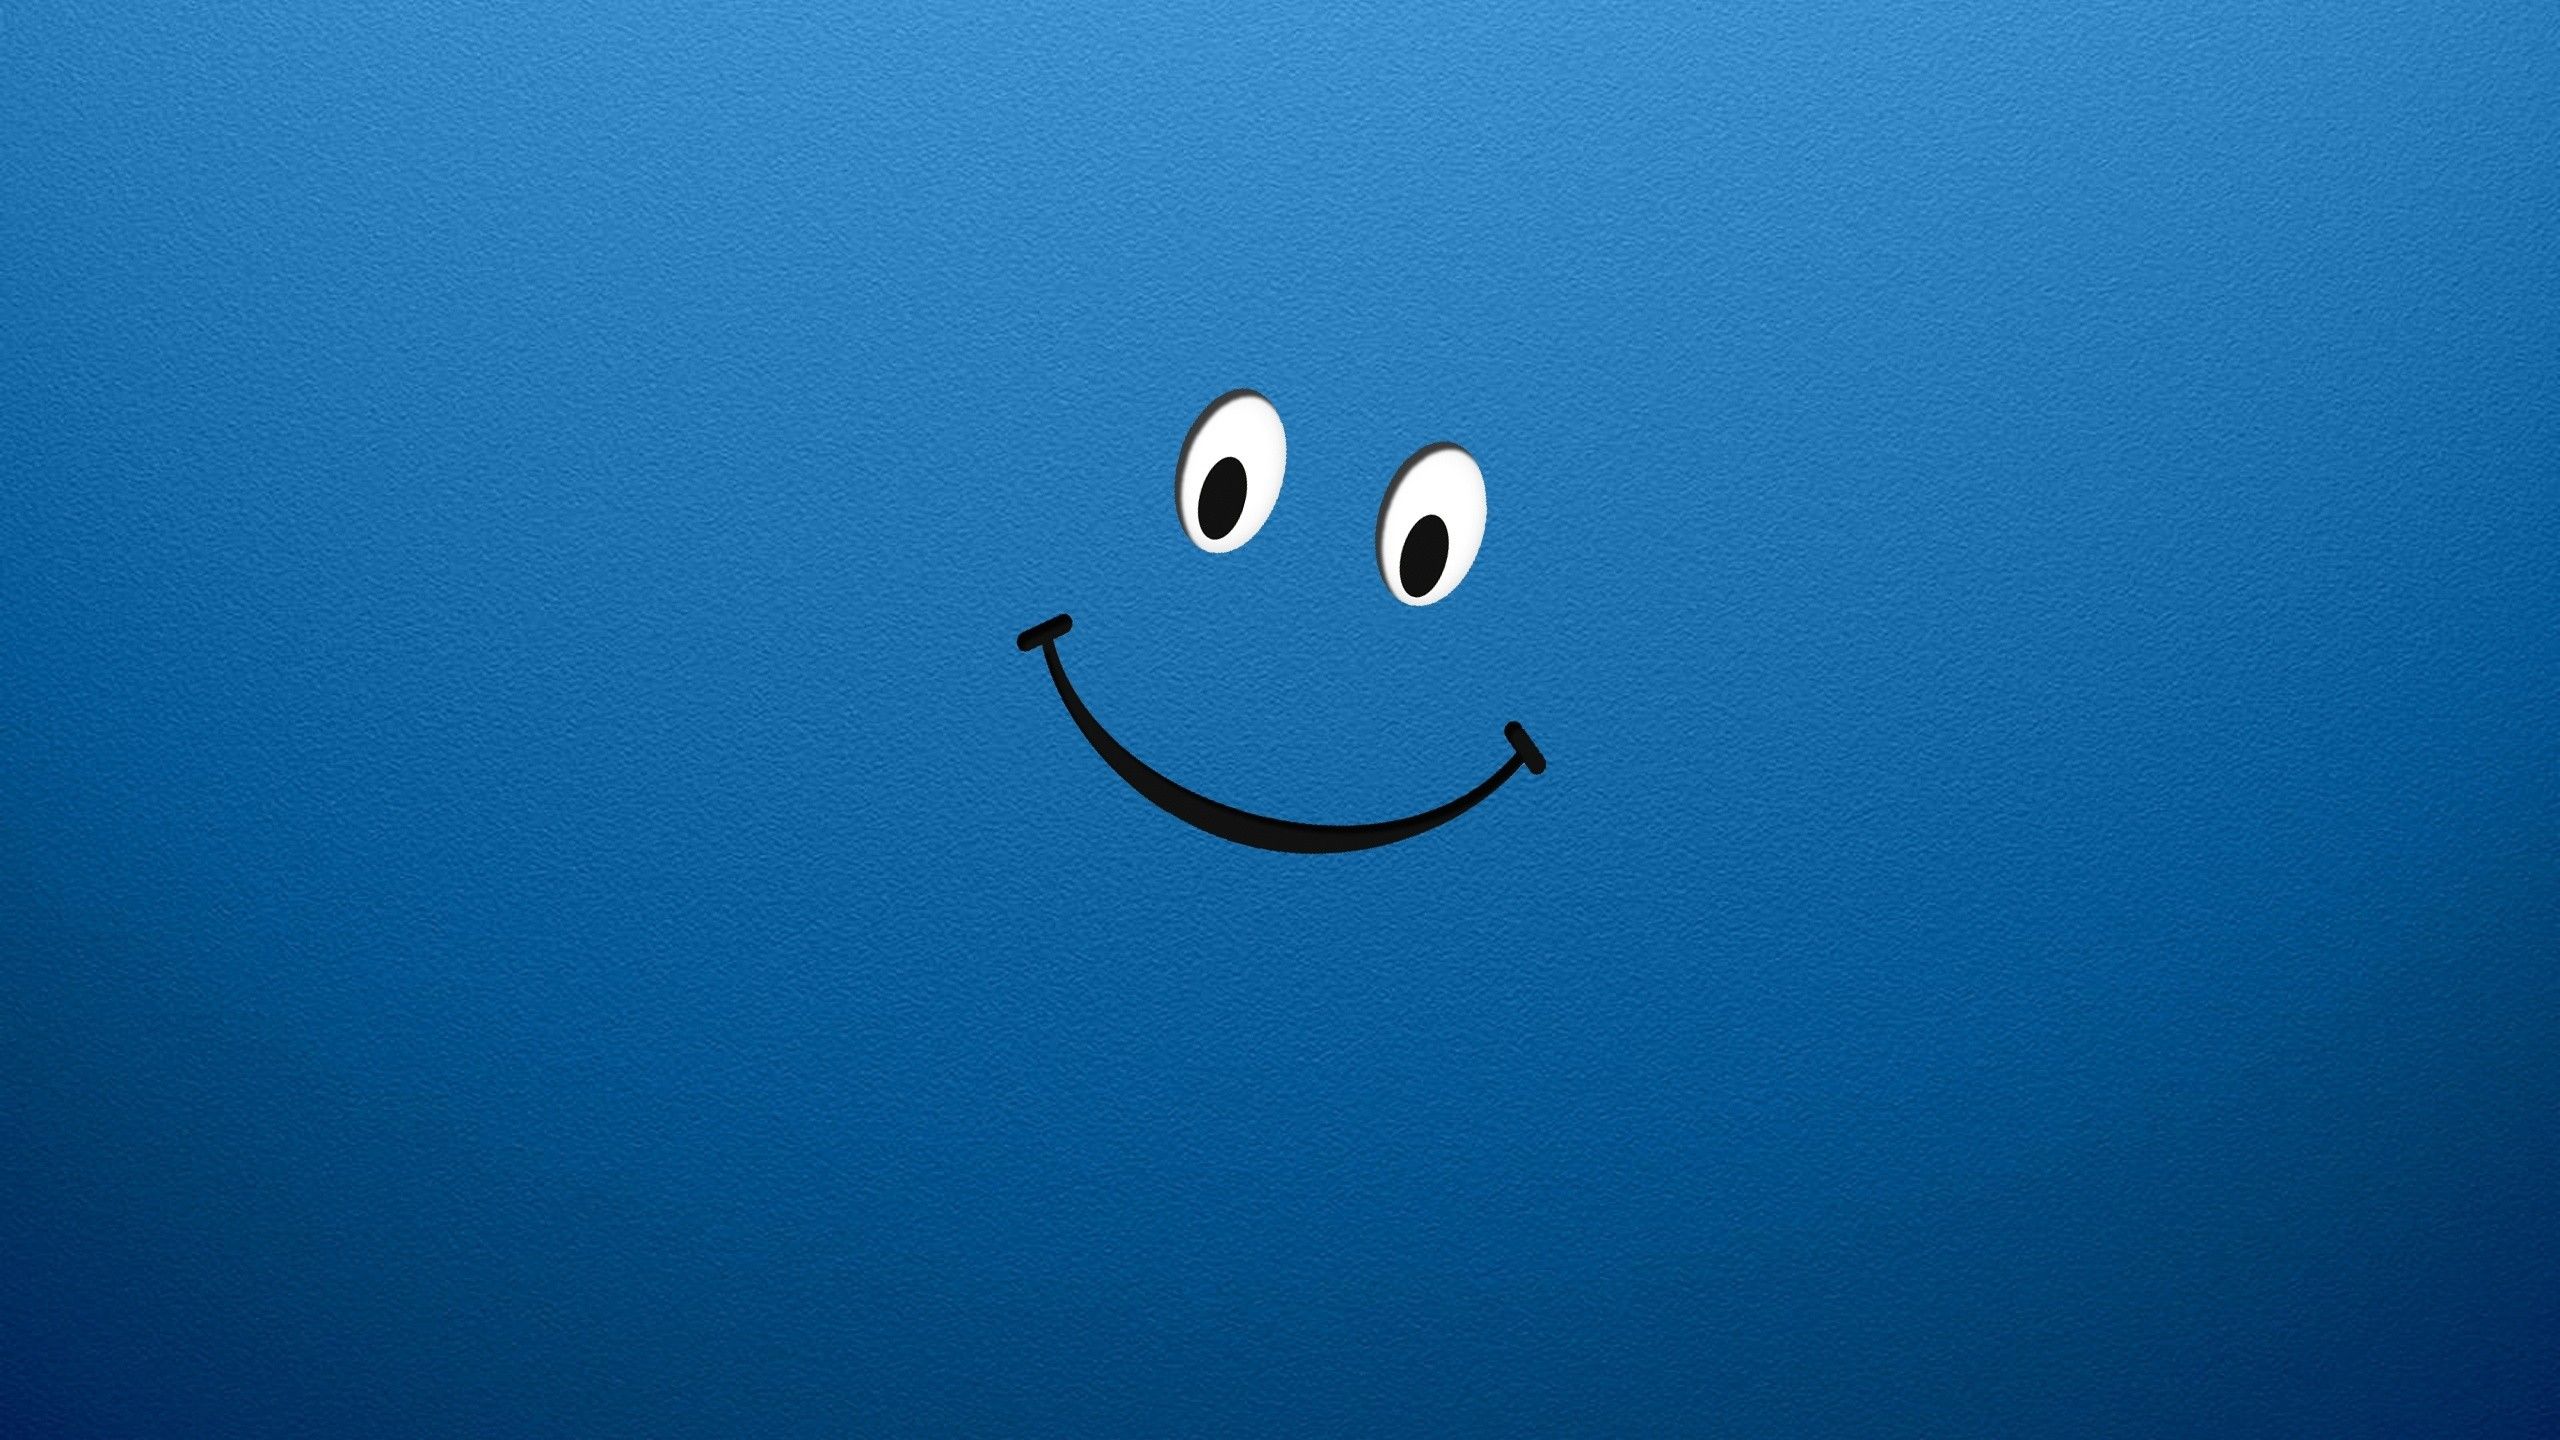 Download Simple Smiley Face Wallpaper 2458 2560x1440 px High resolution